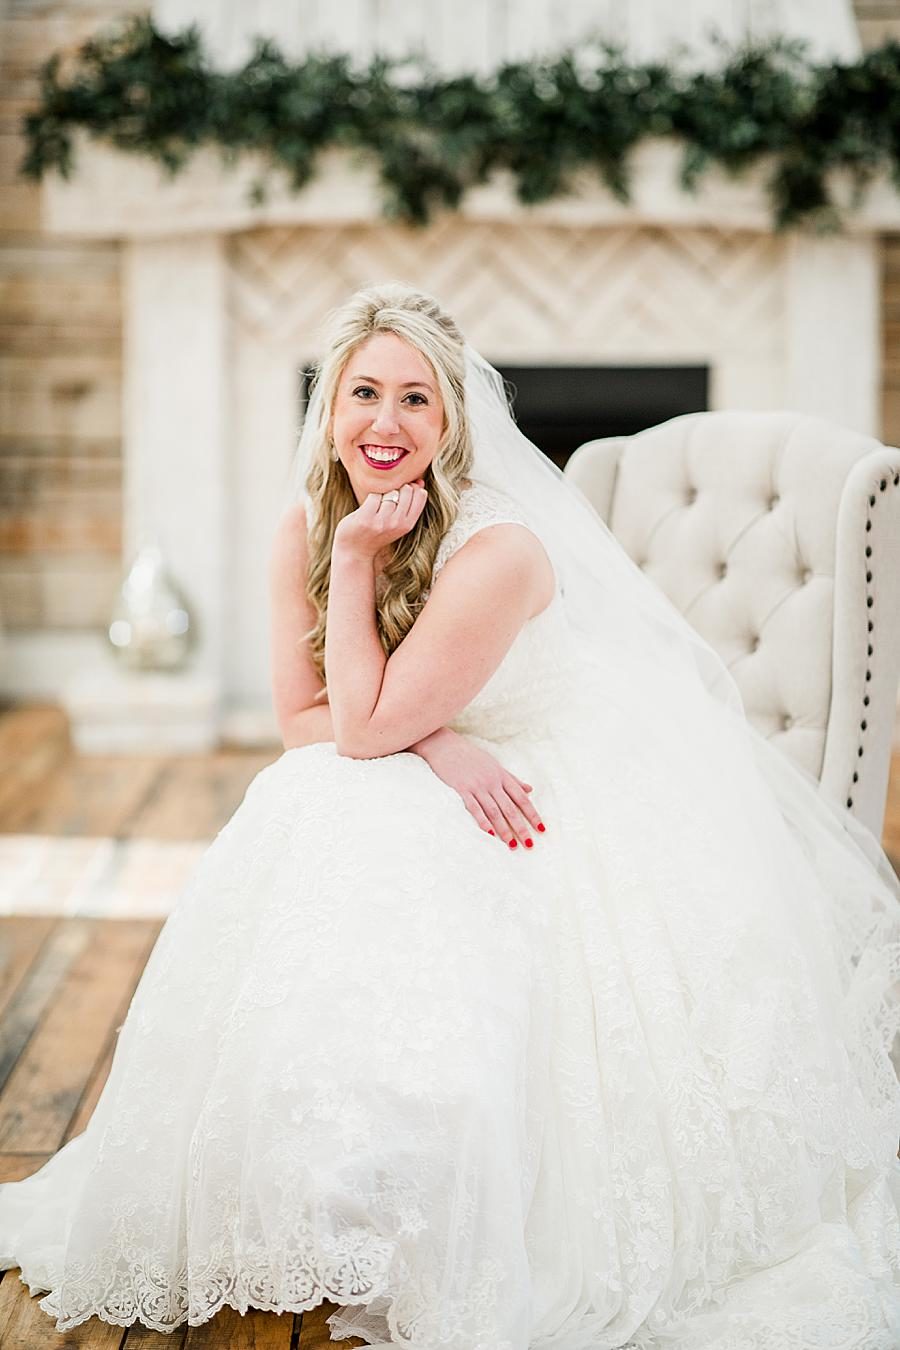 Cream tufted chair at this Ramble Creek Bridal Session by Knoxville Wedding Photographer, Amanda May Photos.